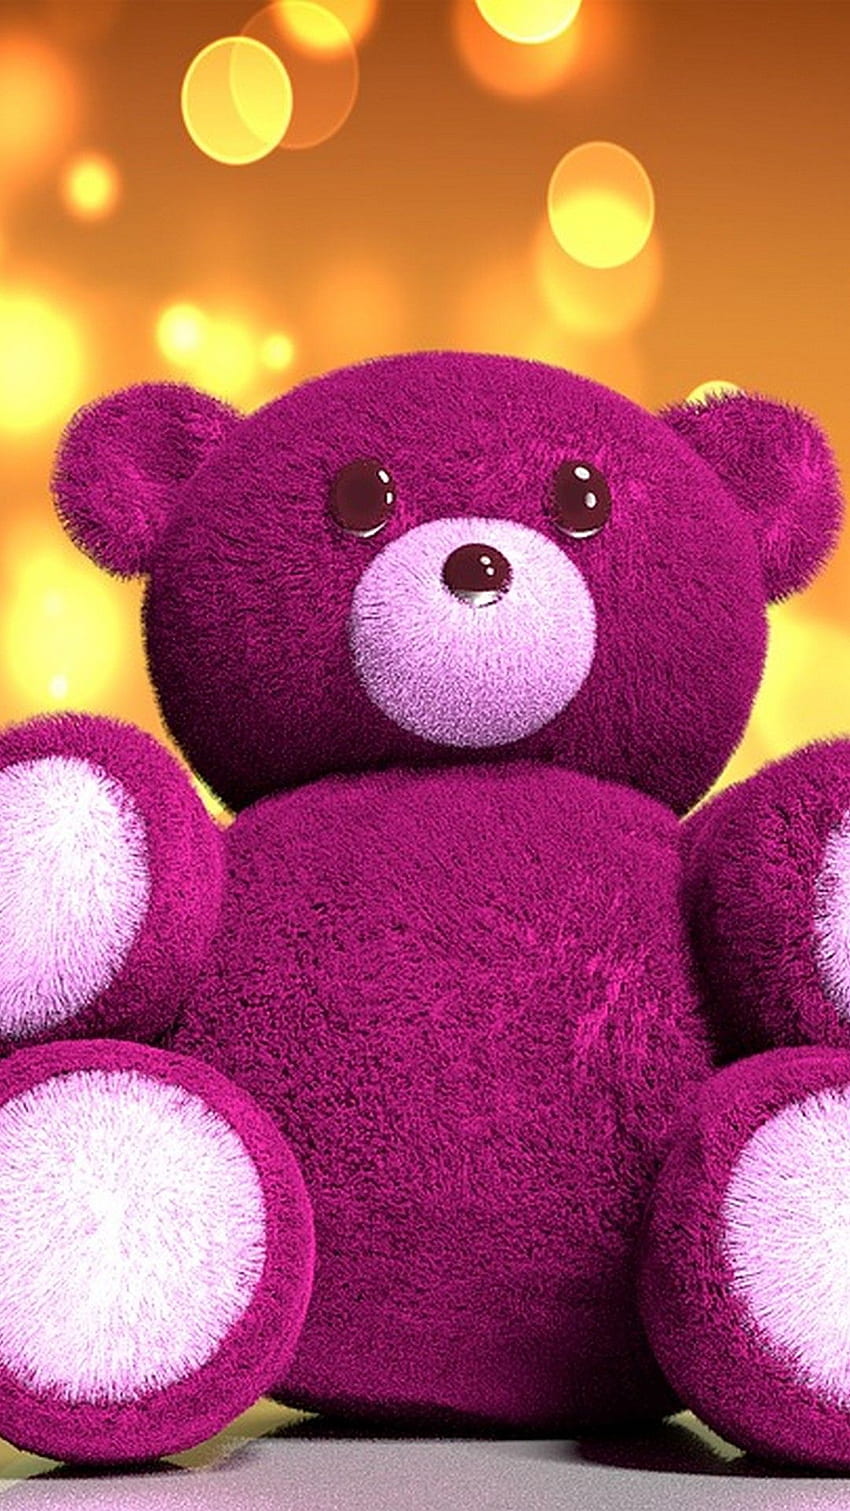 12,000+ Teddy Bear Wallpaper Pictures